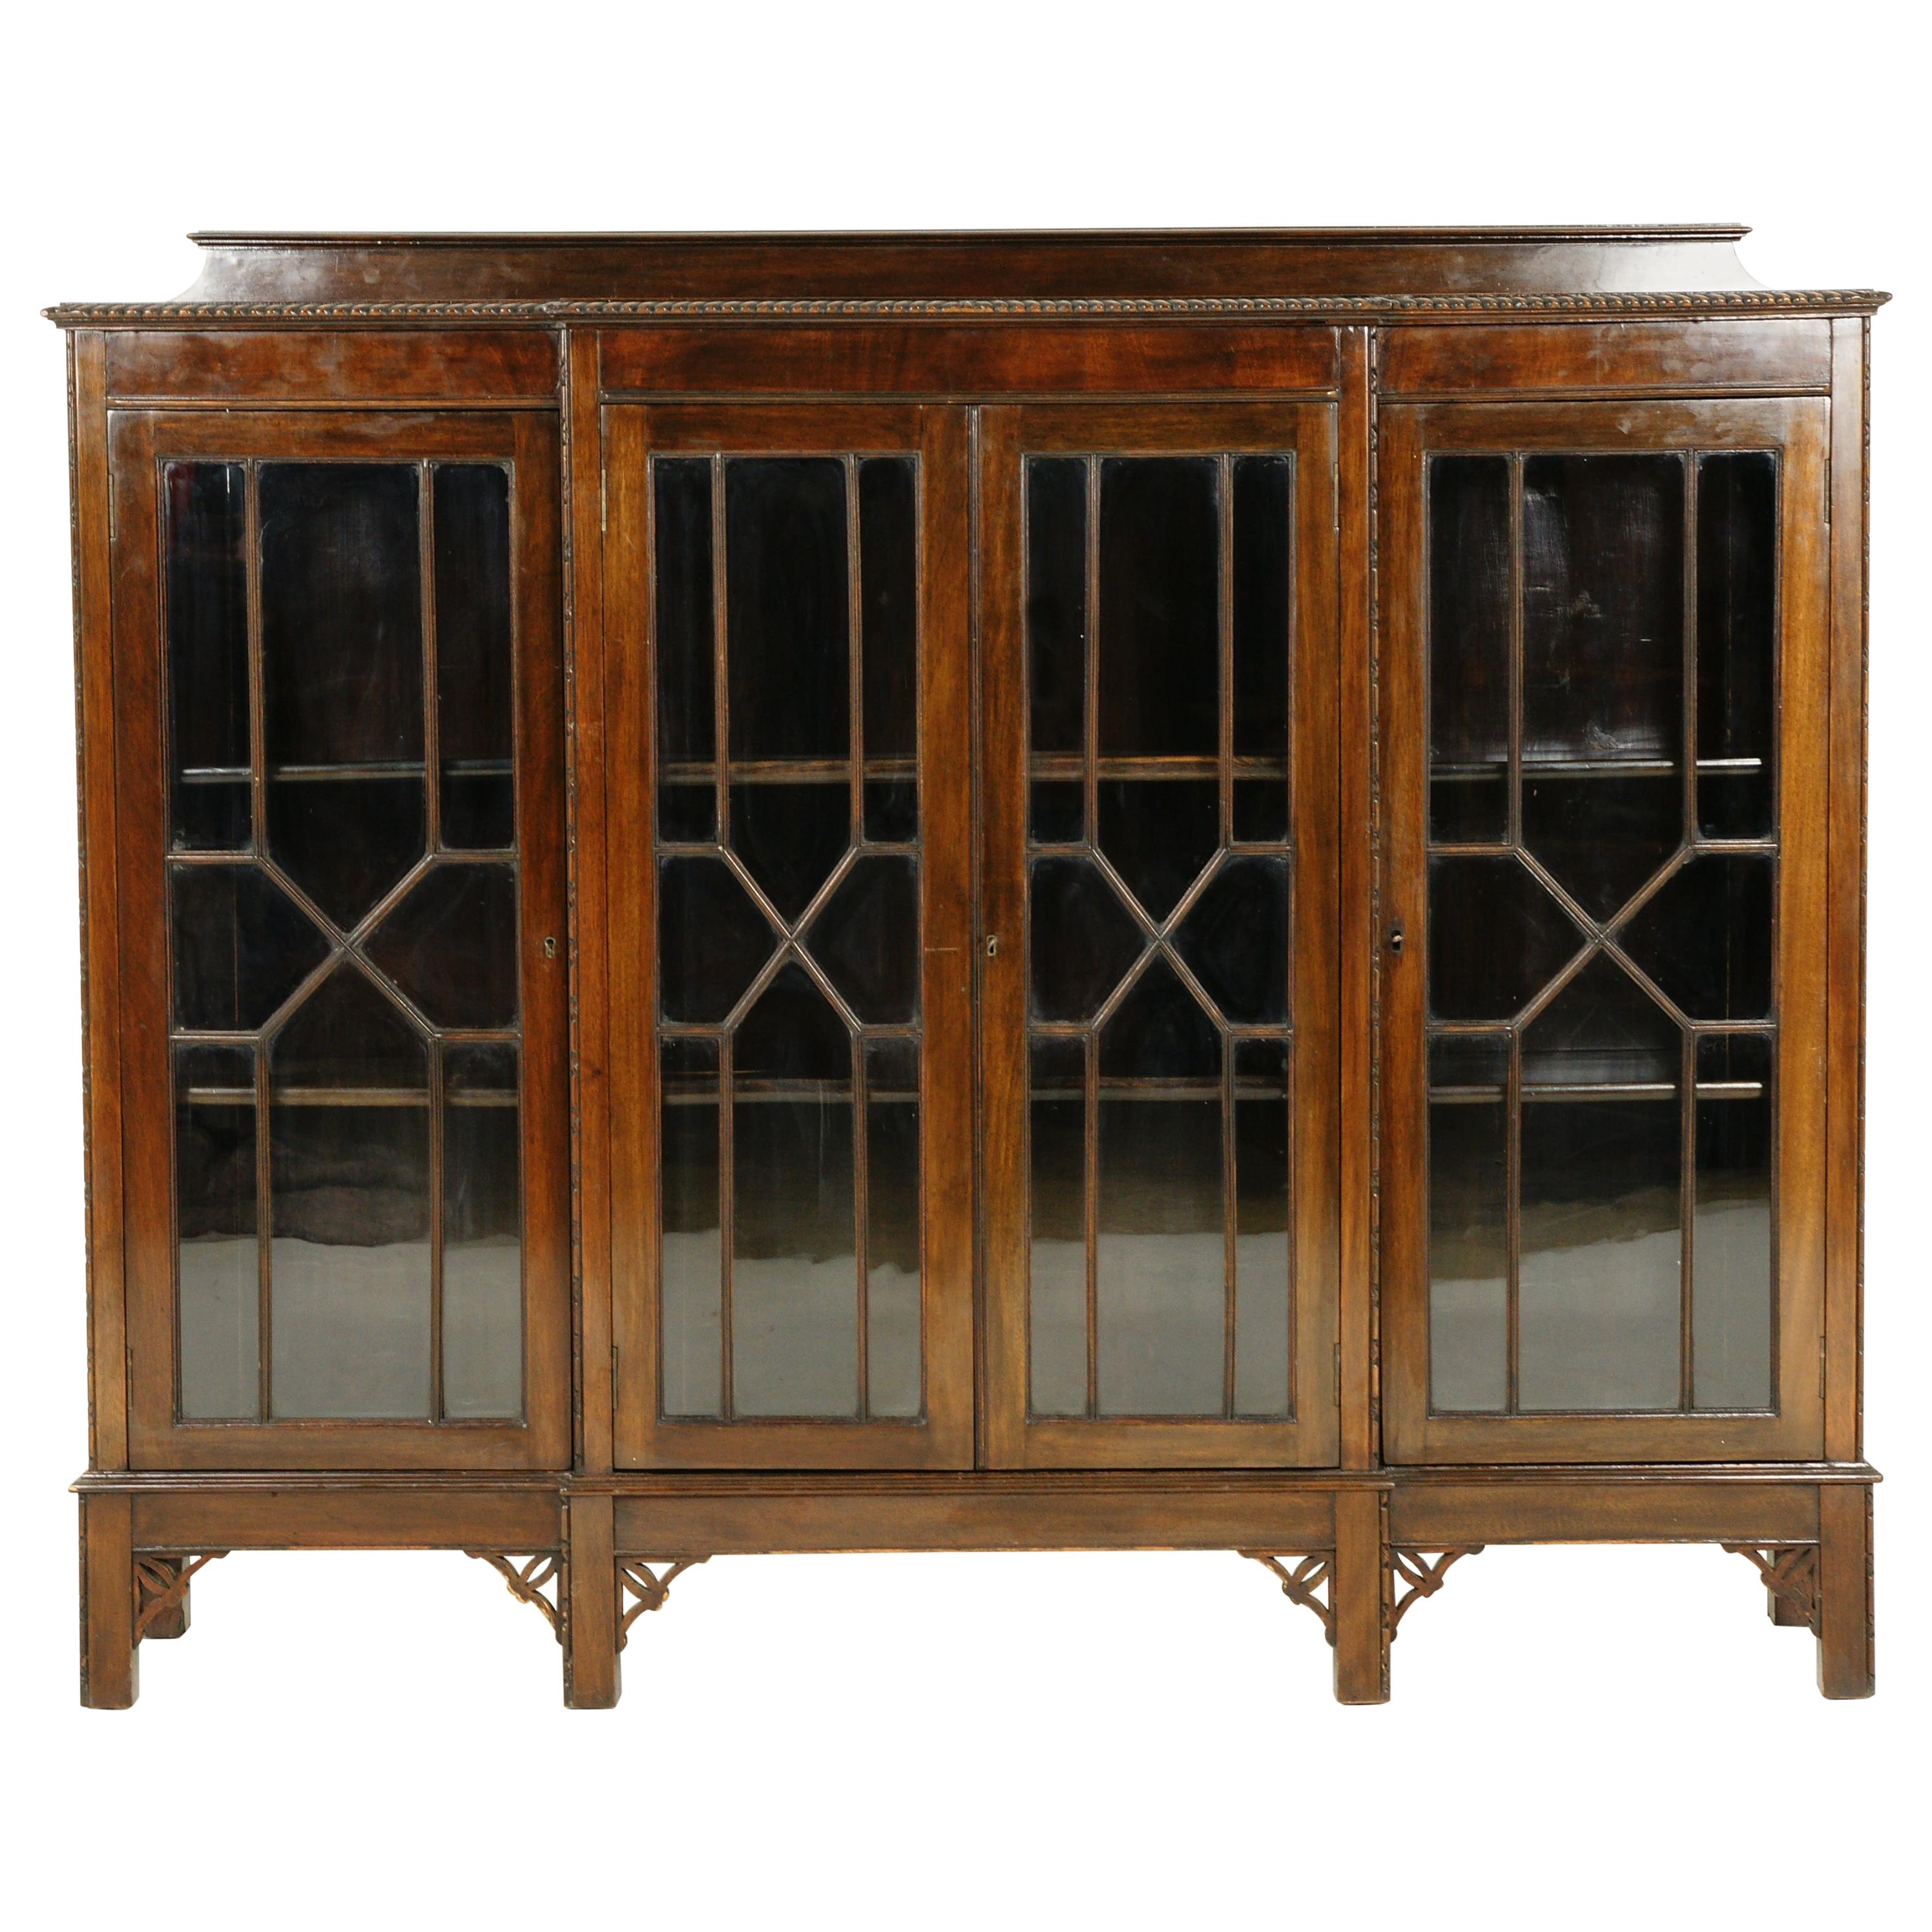 Antique Walnut Display Cabinet, Chippendale Style, Breakfront Bookcase, B2437